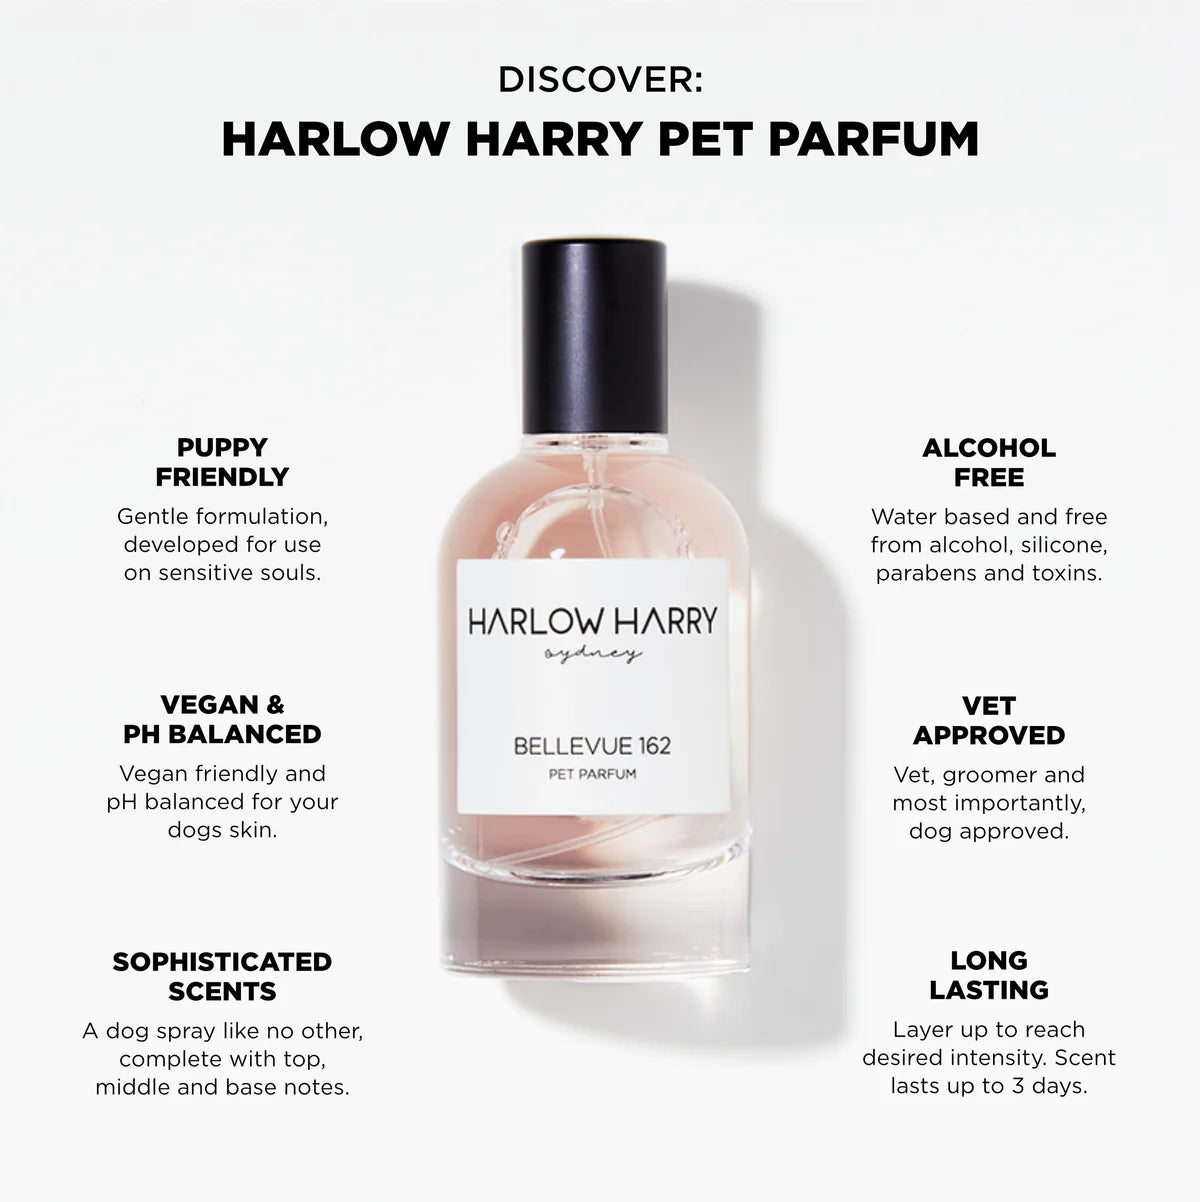 A sleek bottle of Bellevue 162 Dog Perfume by Harlow Harry sits at the center, promoting its gentle, alcohol-free, vegan, ph balanced, and long-lasting qualities, tailored for a pet's skincare needs and presented